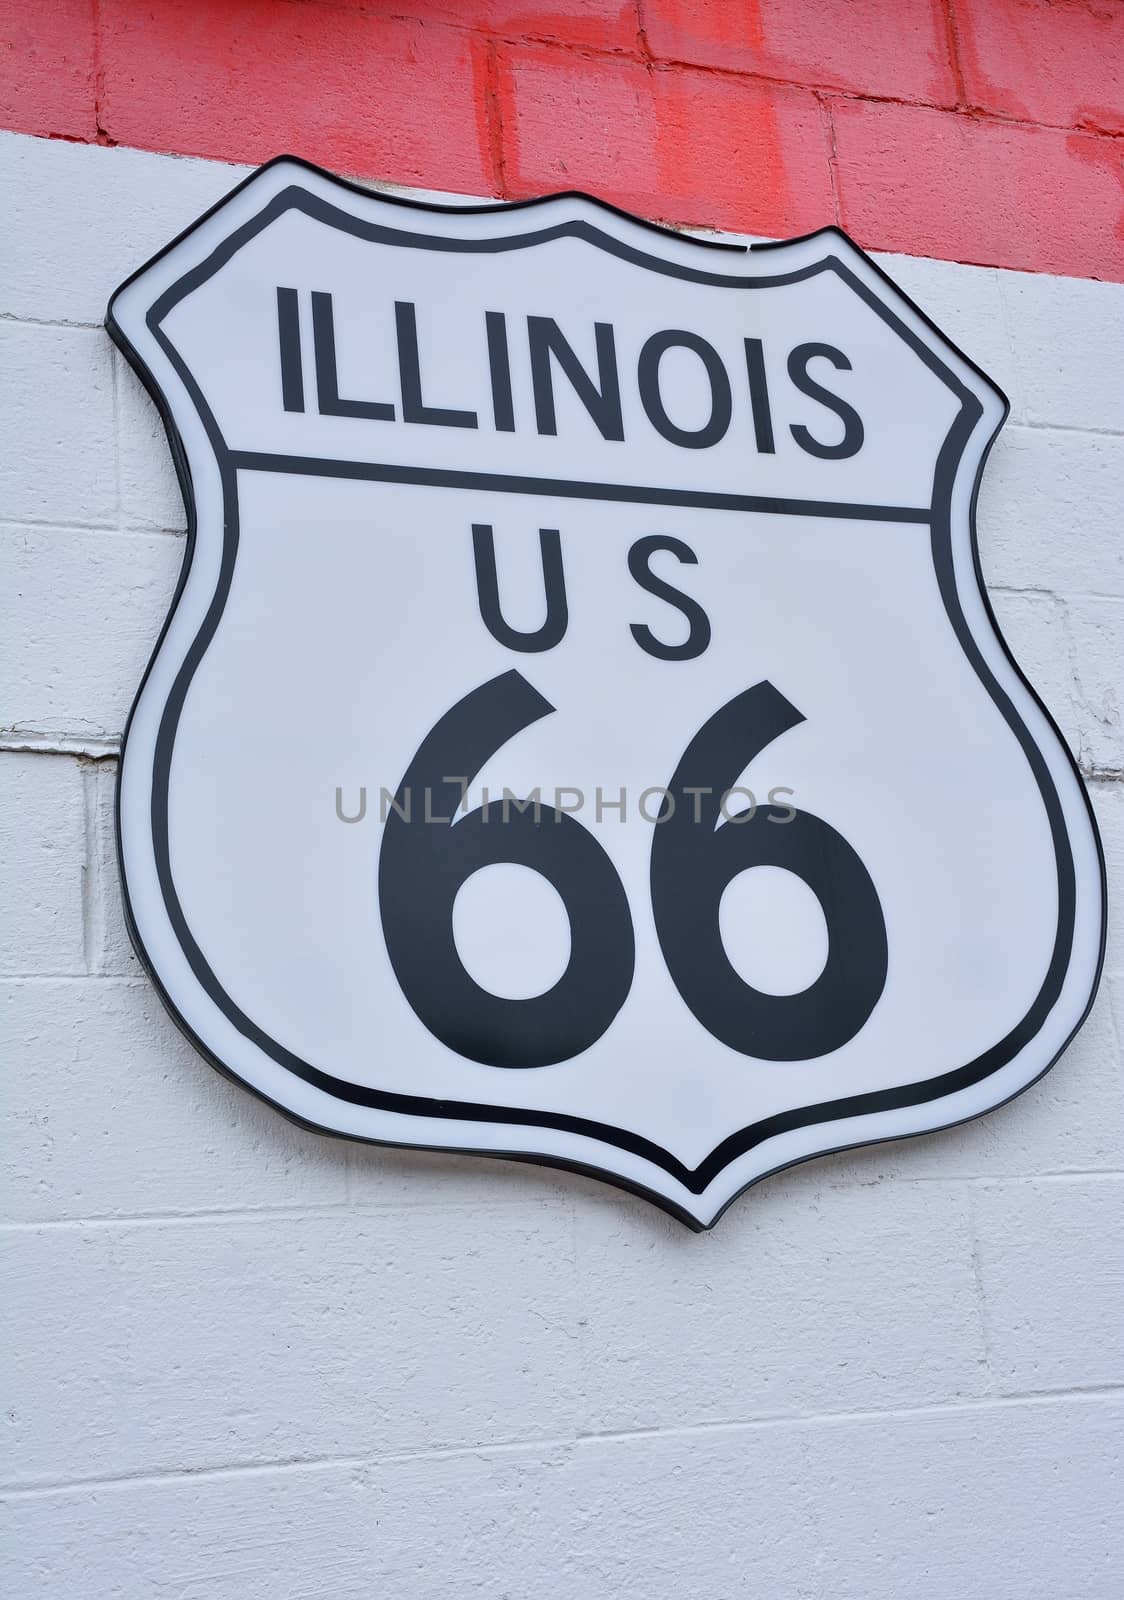 Historic Route 66 road sign. by CreativePhotoSpain